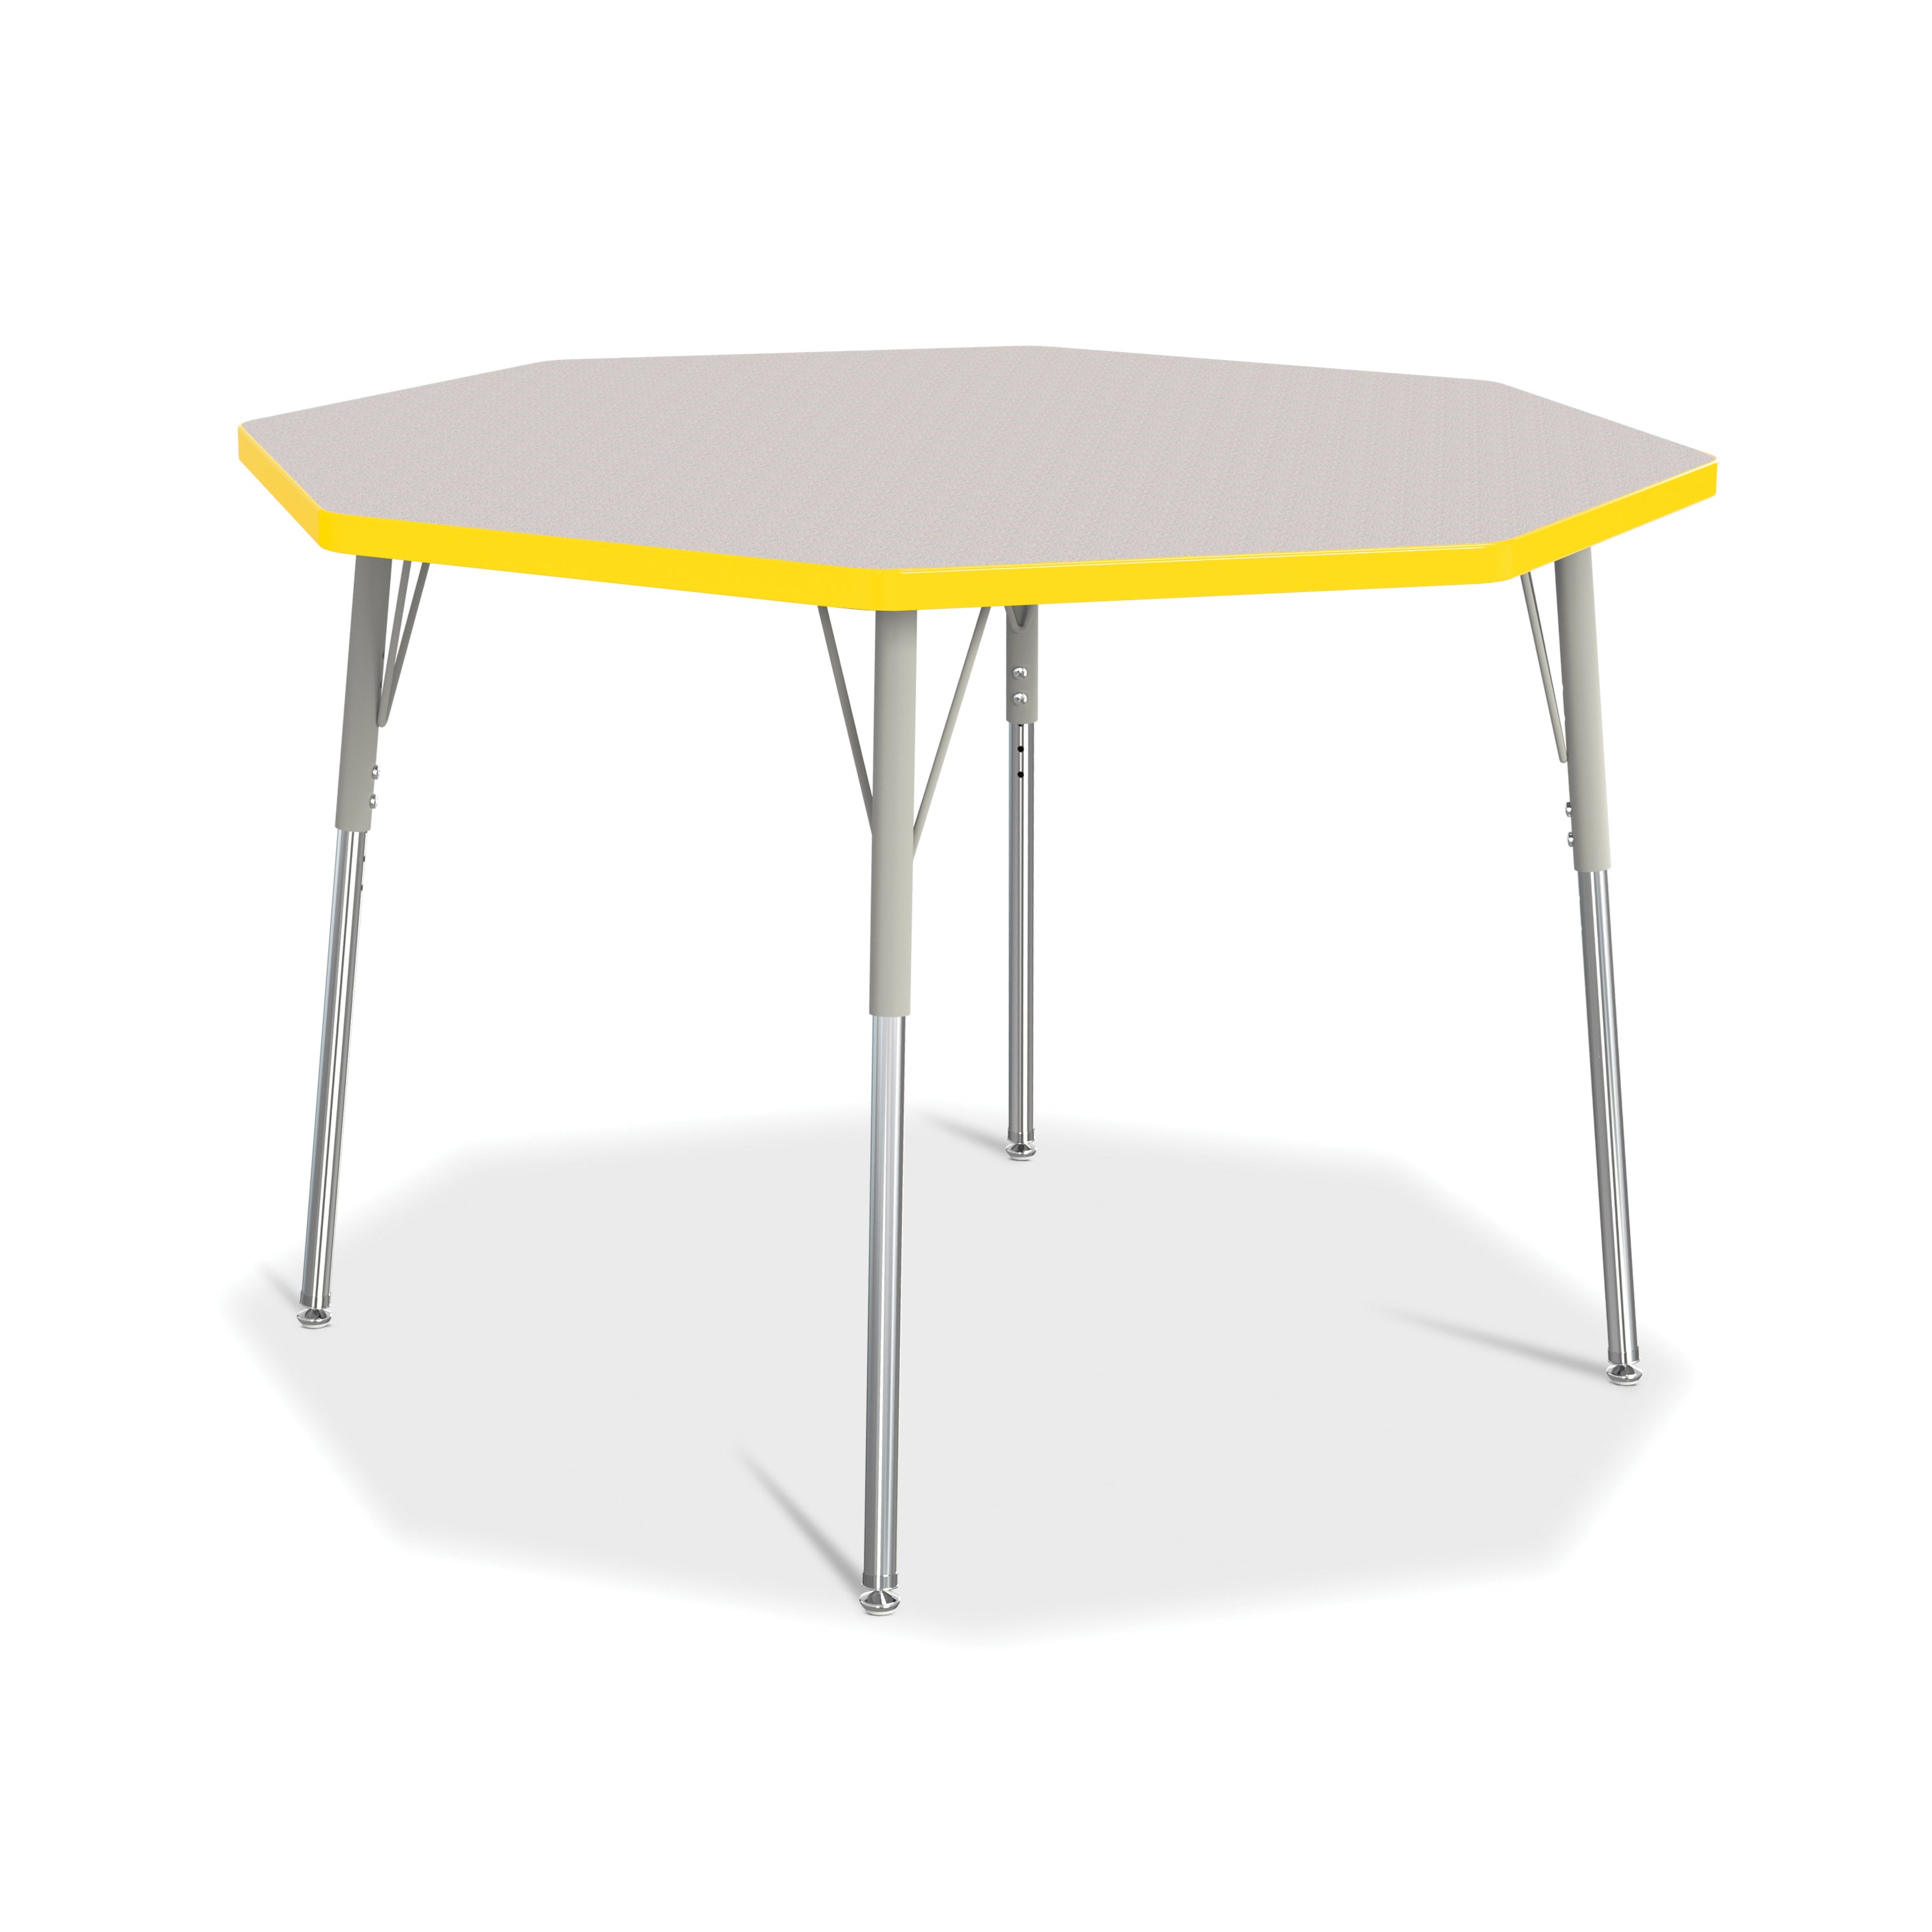 6428JCA007, Berries Octagon Activity Table - 48" X 48", A-height - Freckled Gray/Yellow/Gray